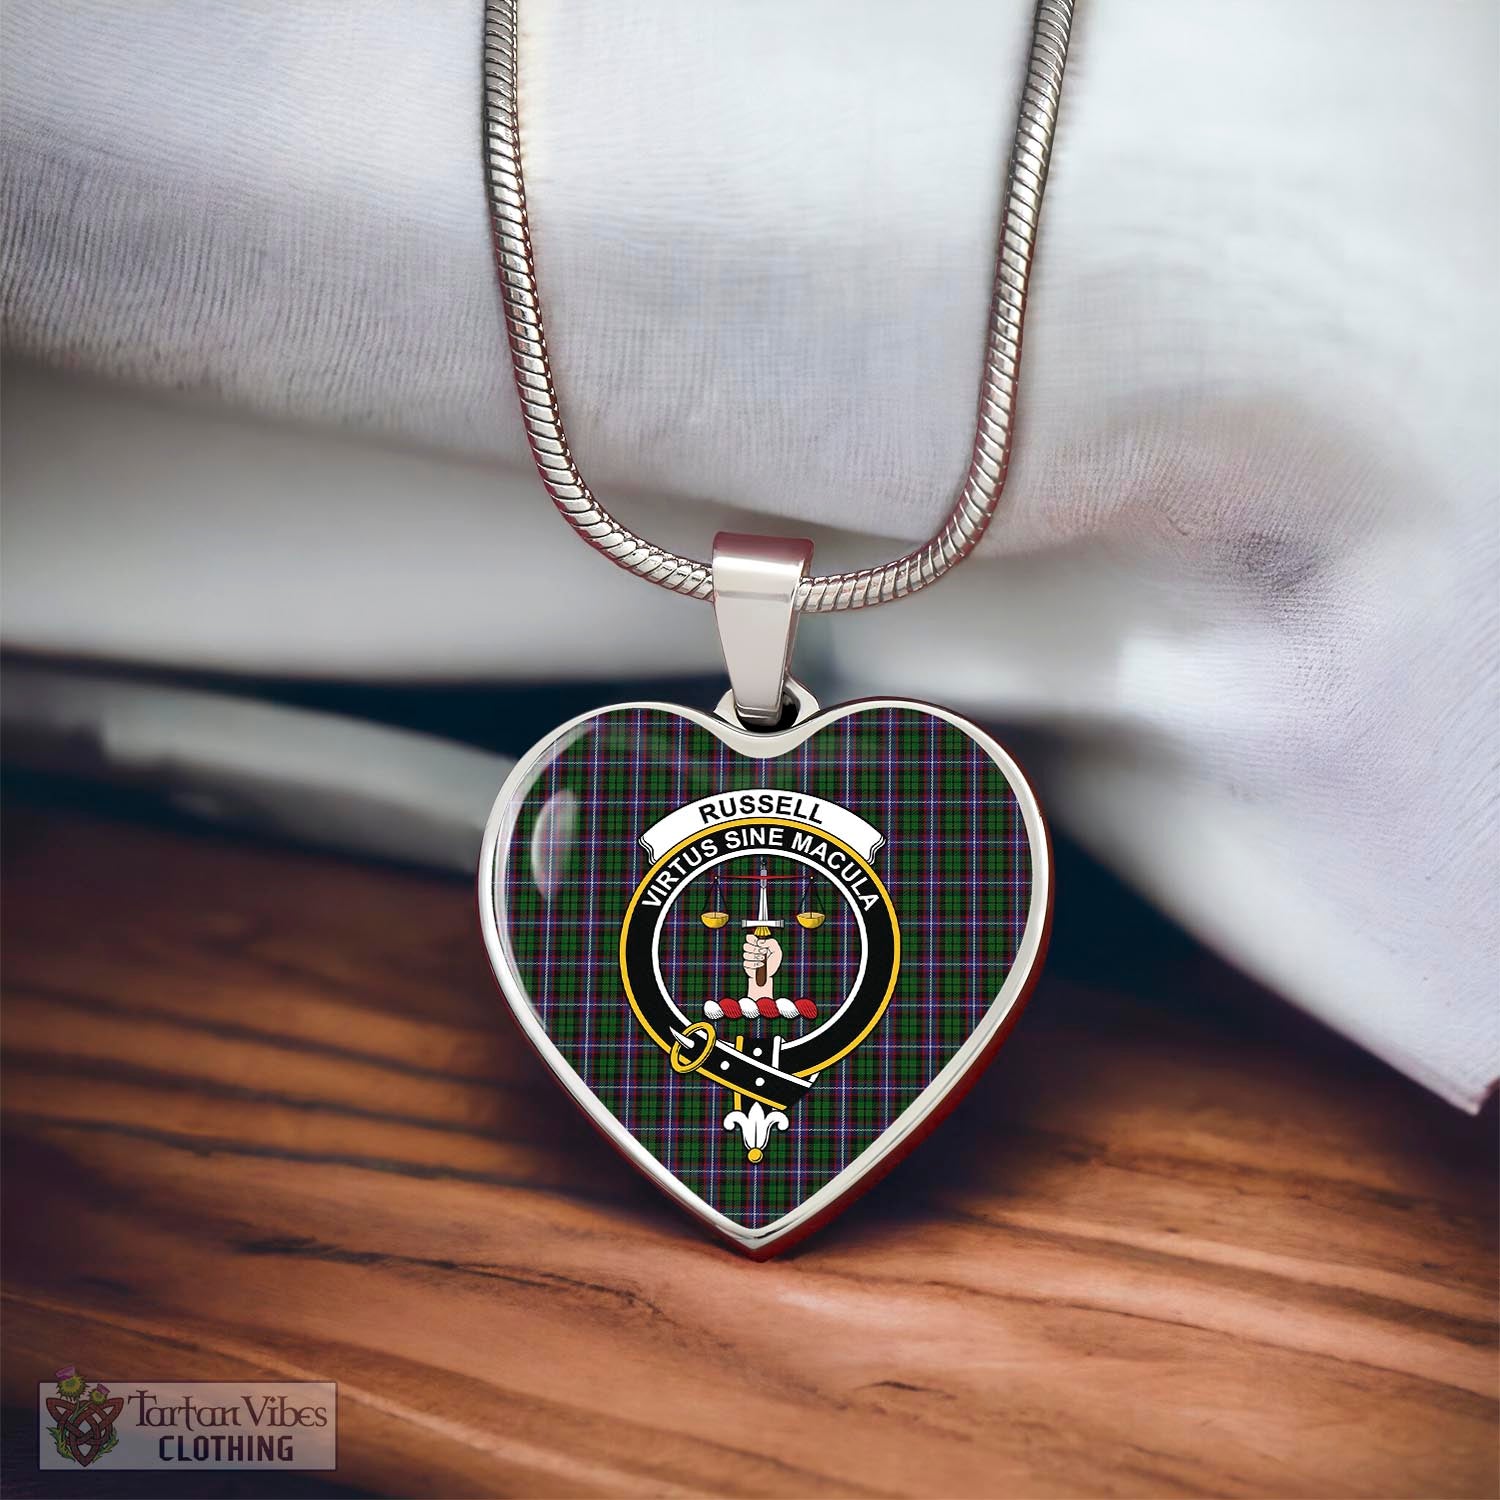 Tartan Vibes Clothing Russell Tartan Heart Necklace with Family Crest